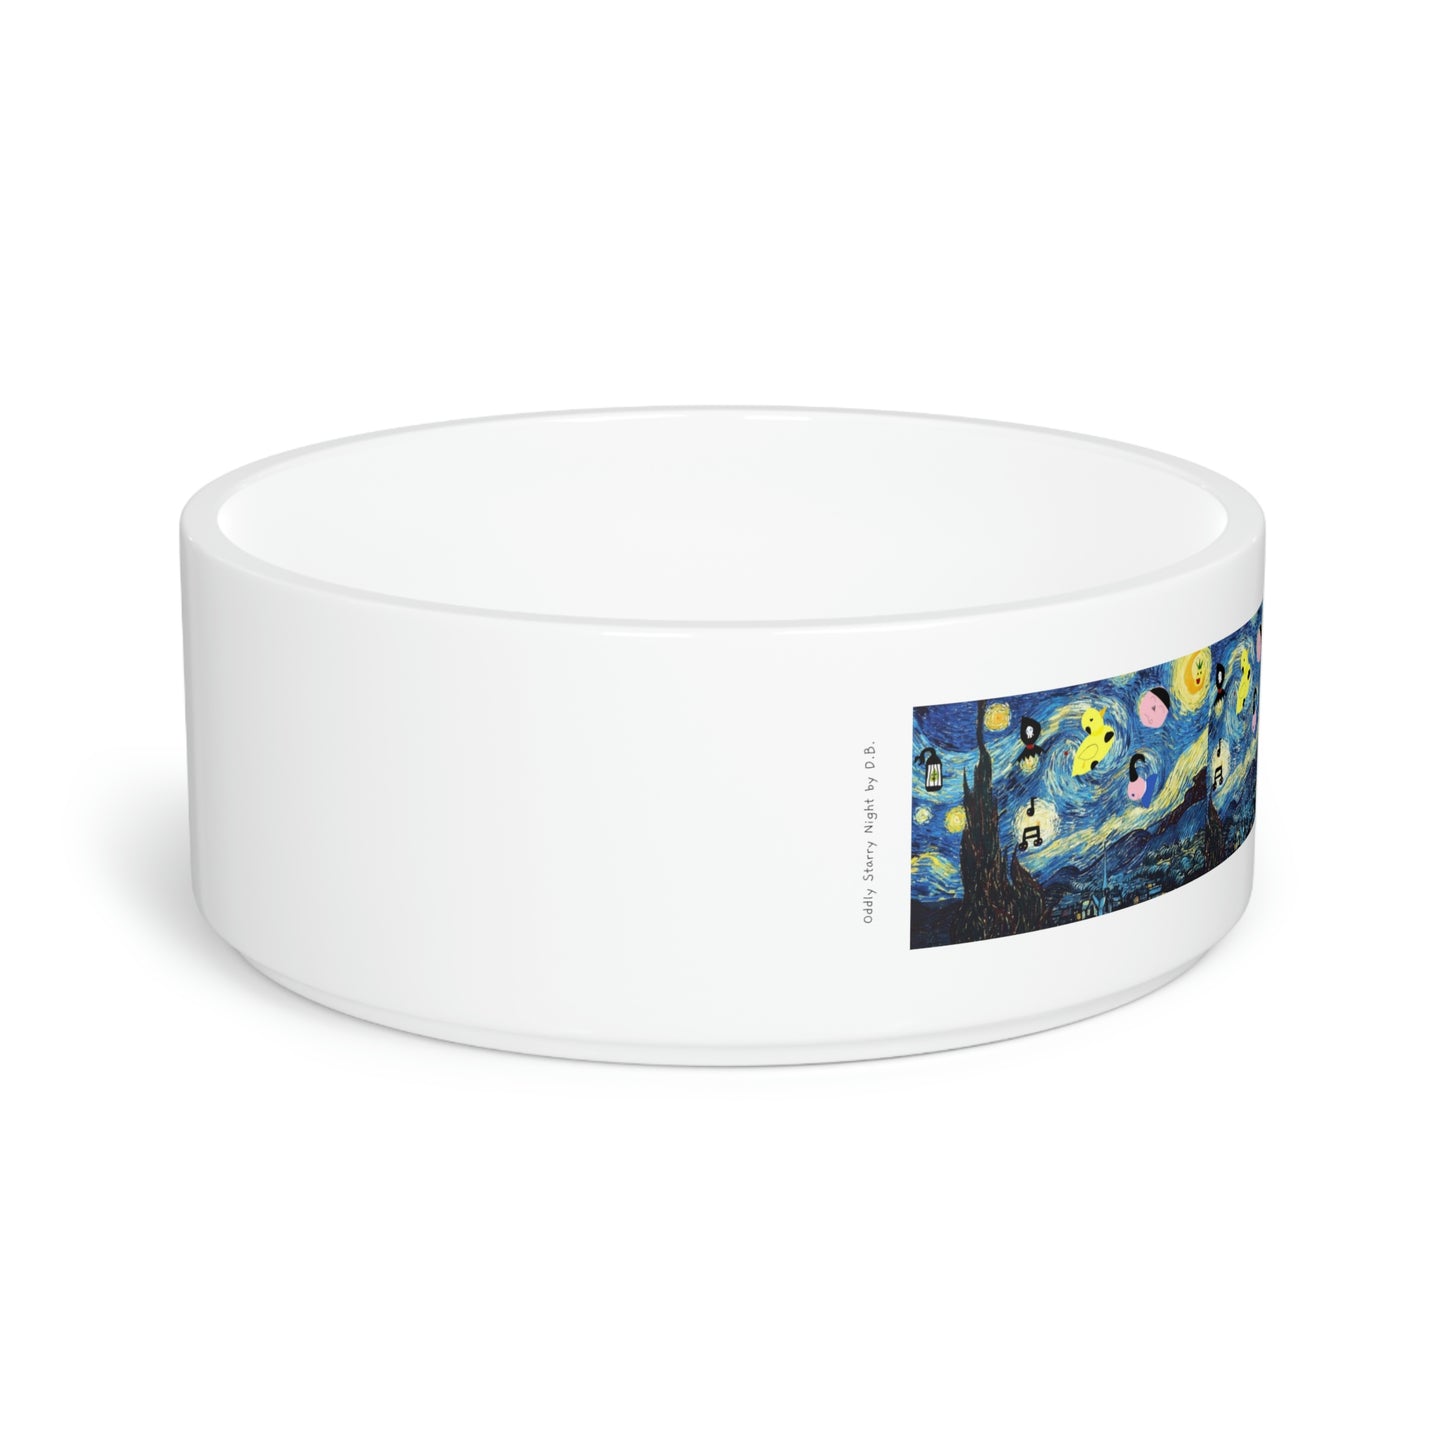 Pet Bowl with Oddly Starry Night print by D.B.